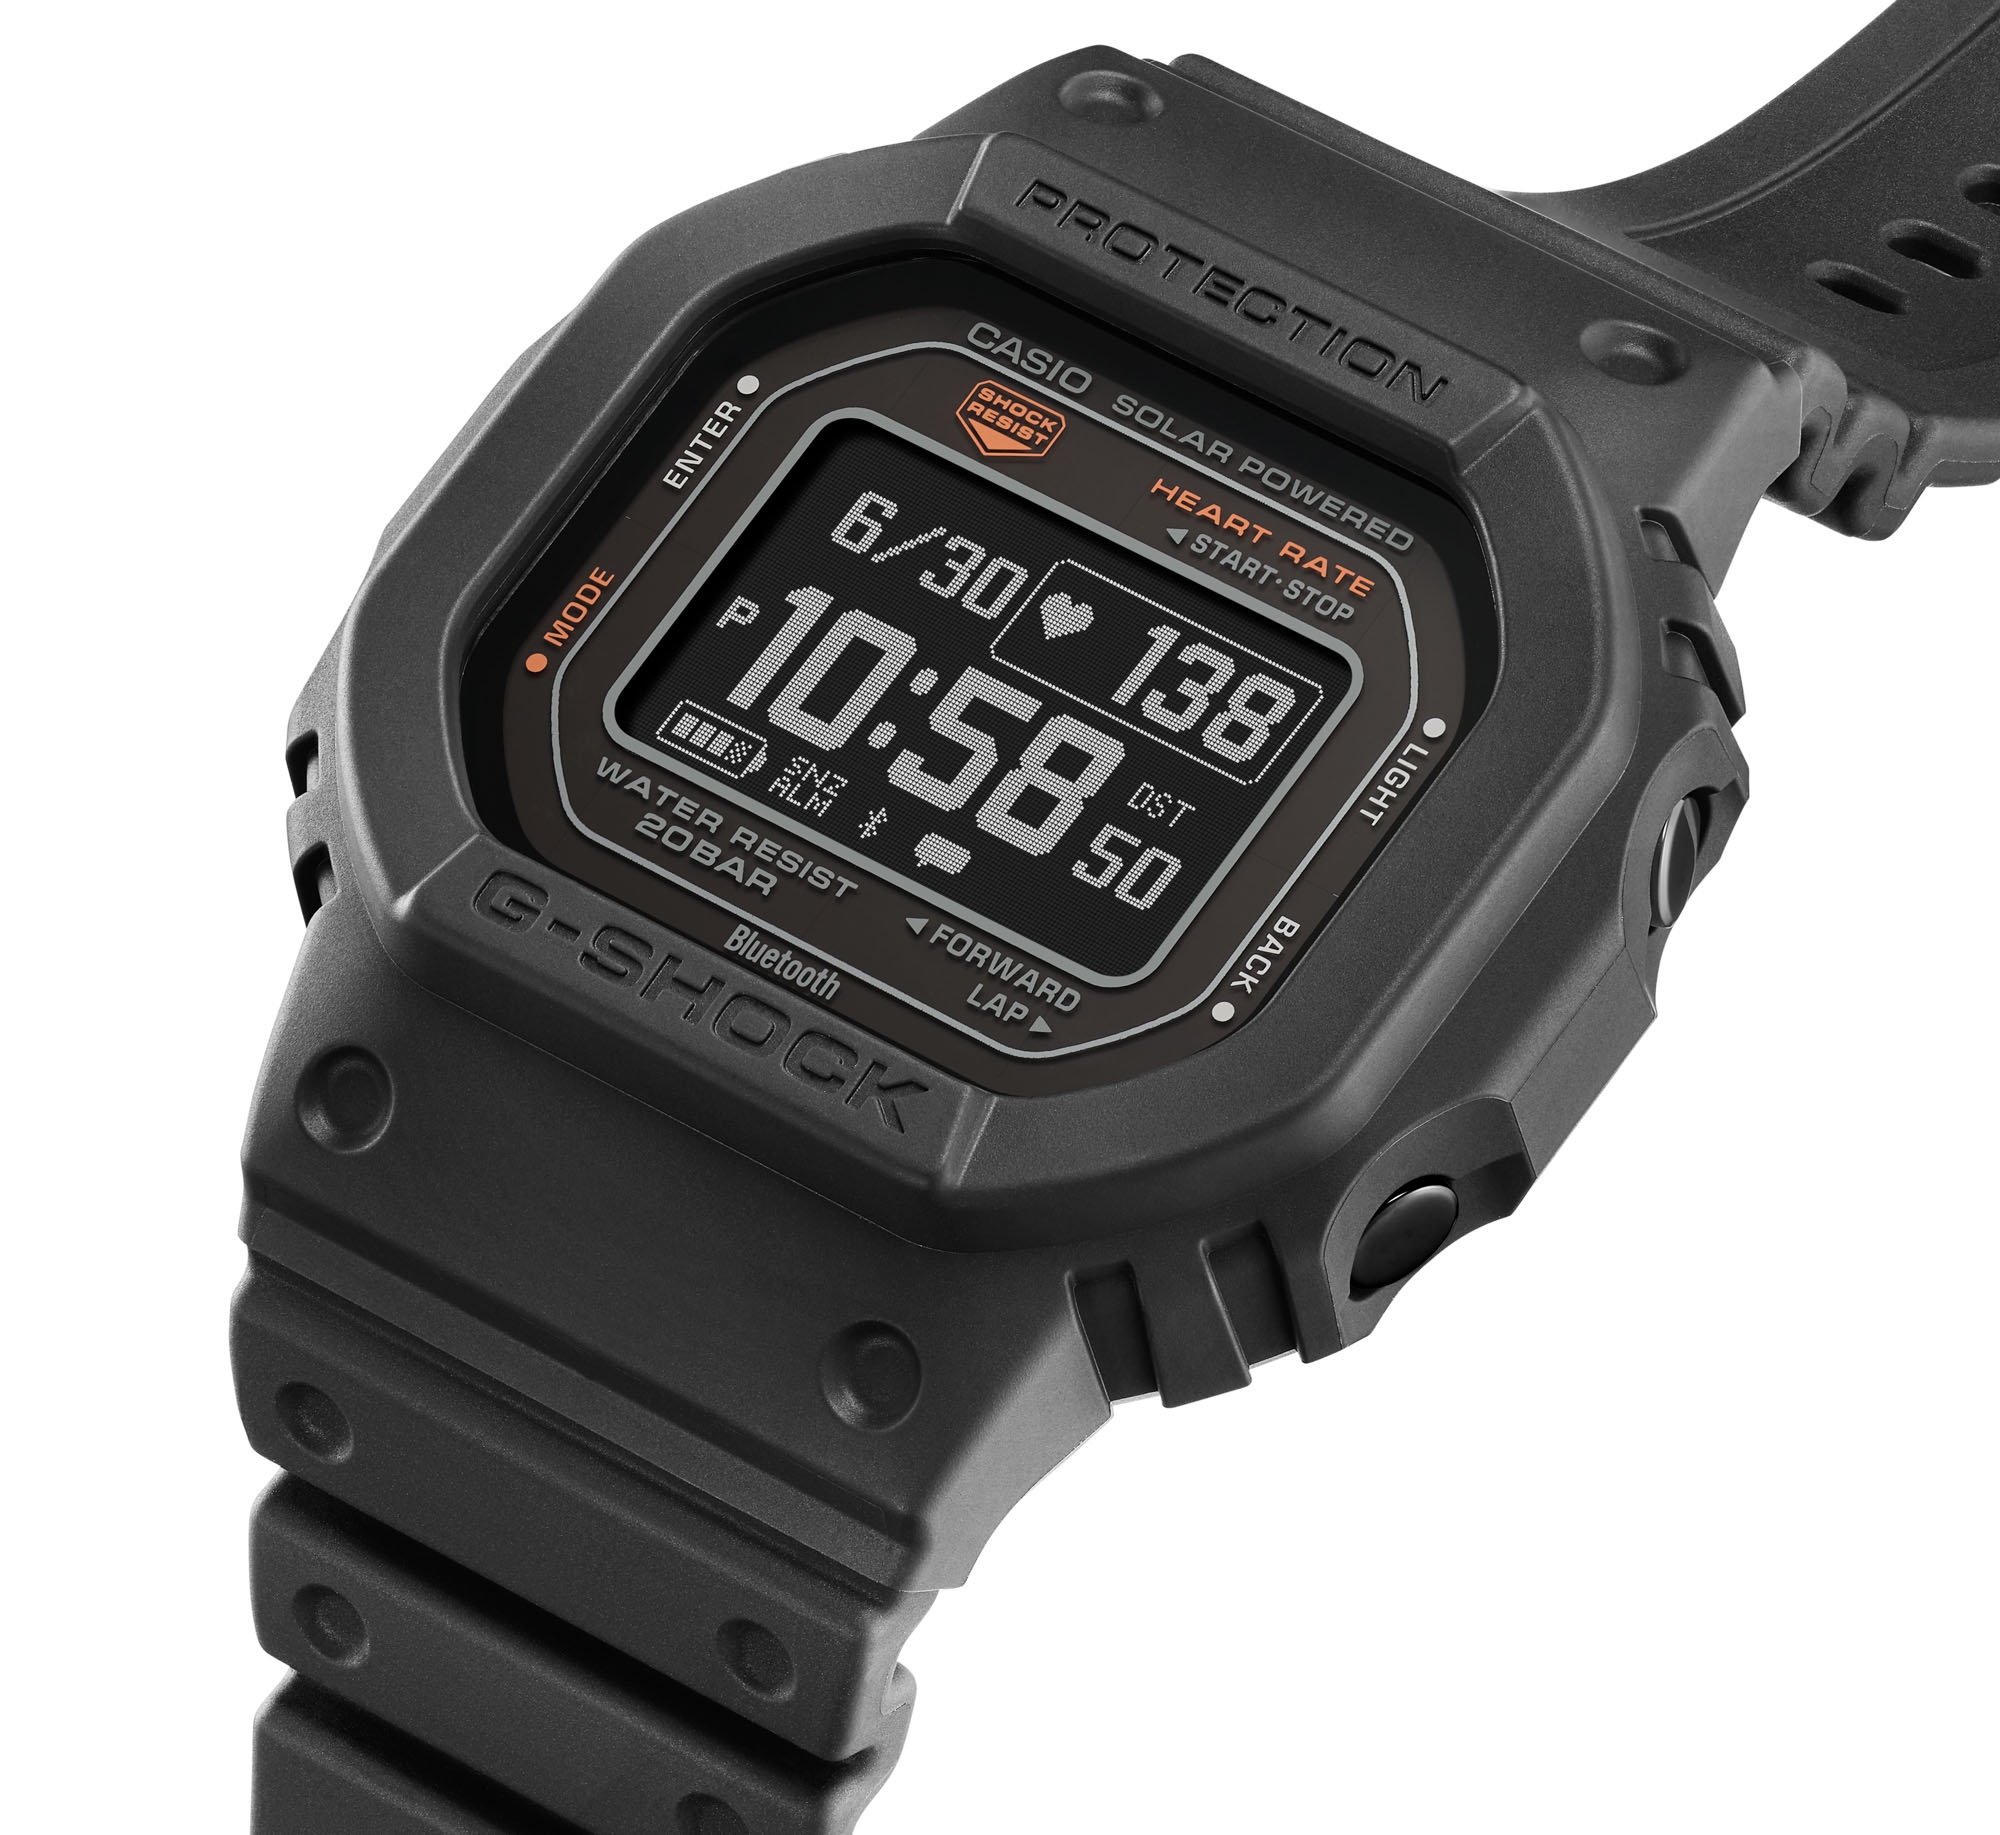 Casio Introduces The G-Shock Move DWH5600 Fitness Tracker Watch